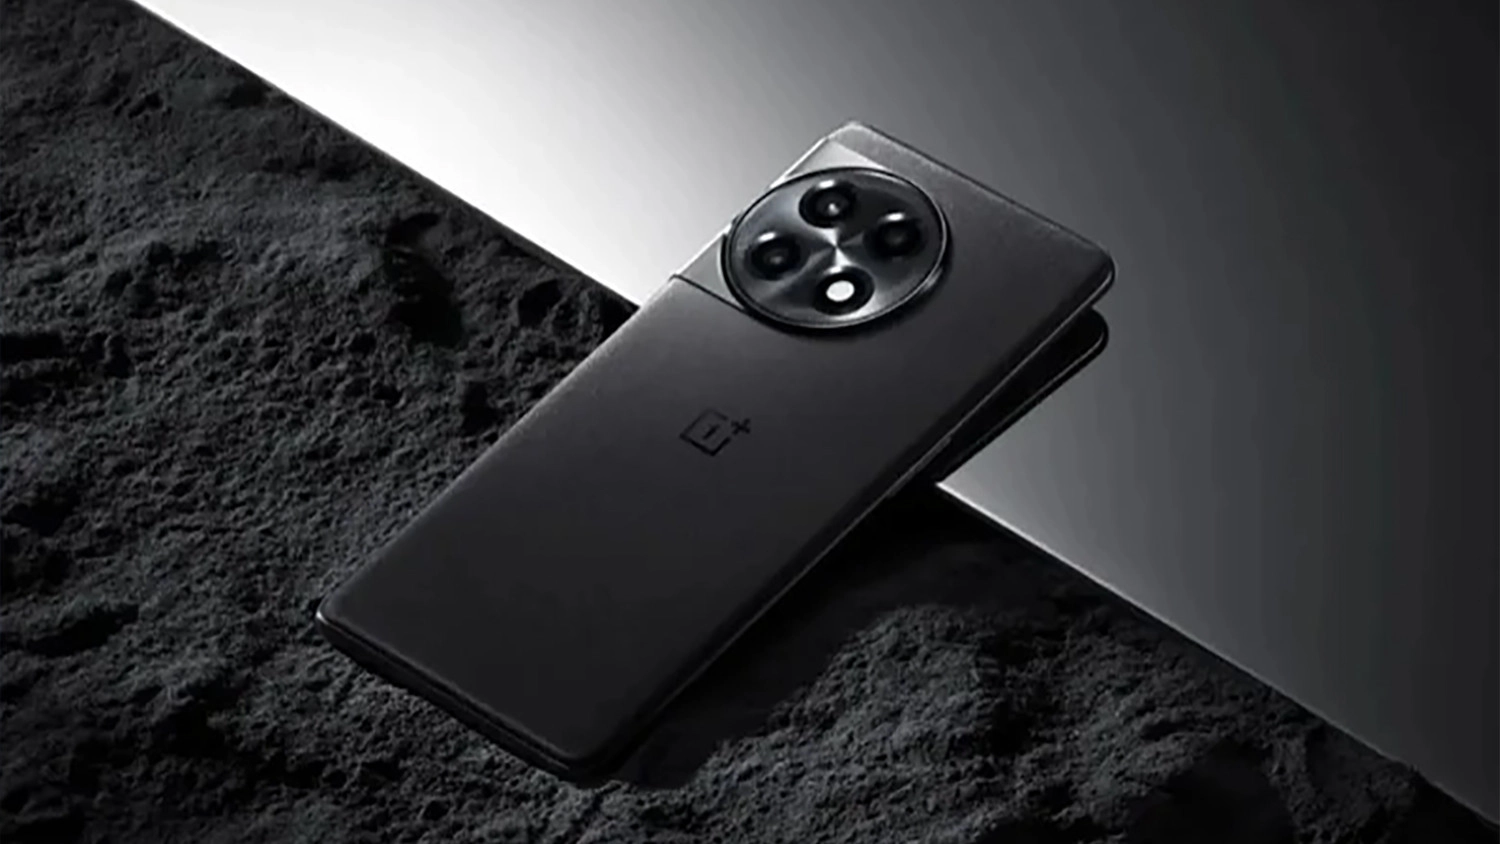 thay-kinh-lung-thay-mat-kinh-sau-oneplus-ace-2-pro-co-thay